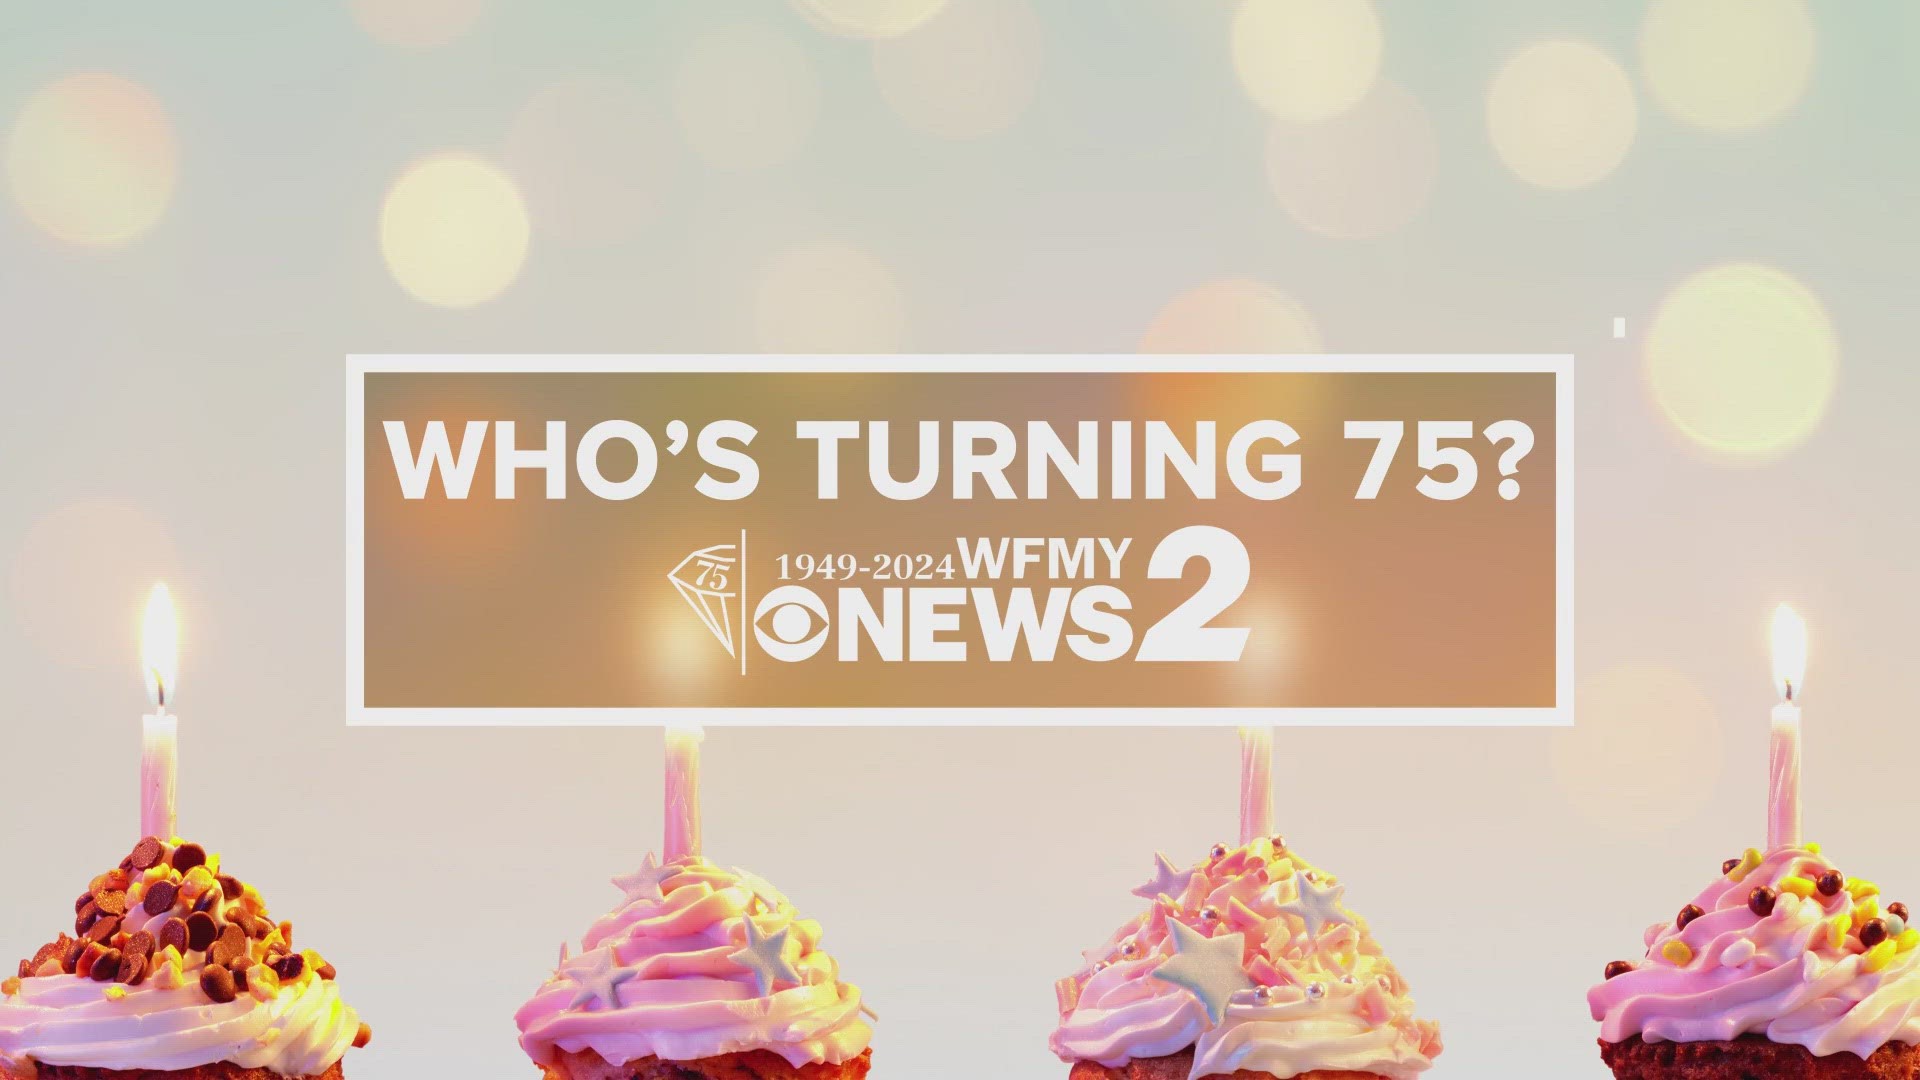 As WFMY News 2 celebrates turning 75 in 2024, we're also celebrating the members of our community turning 75 this year!